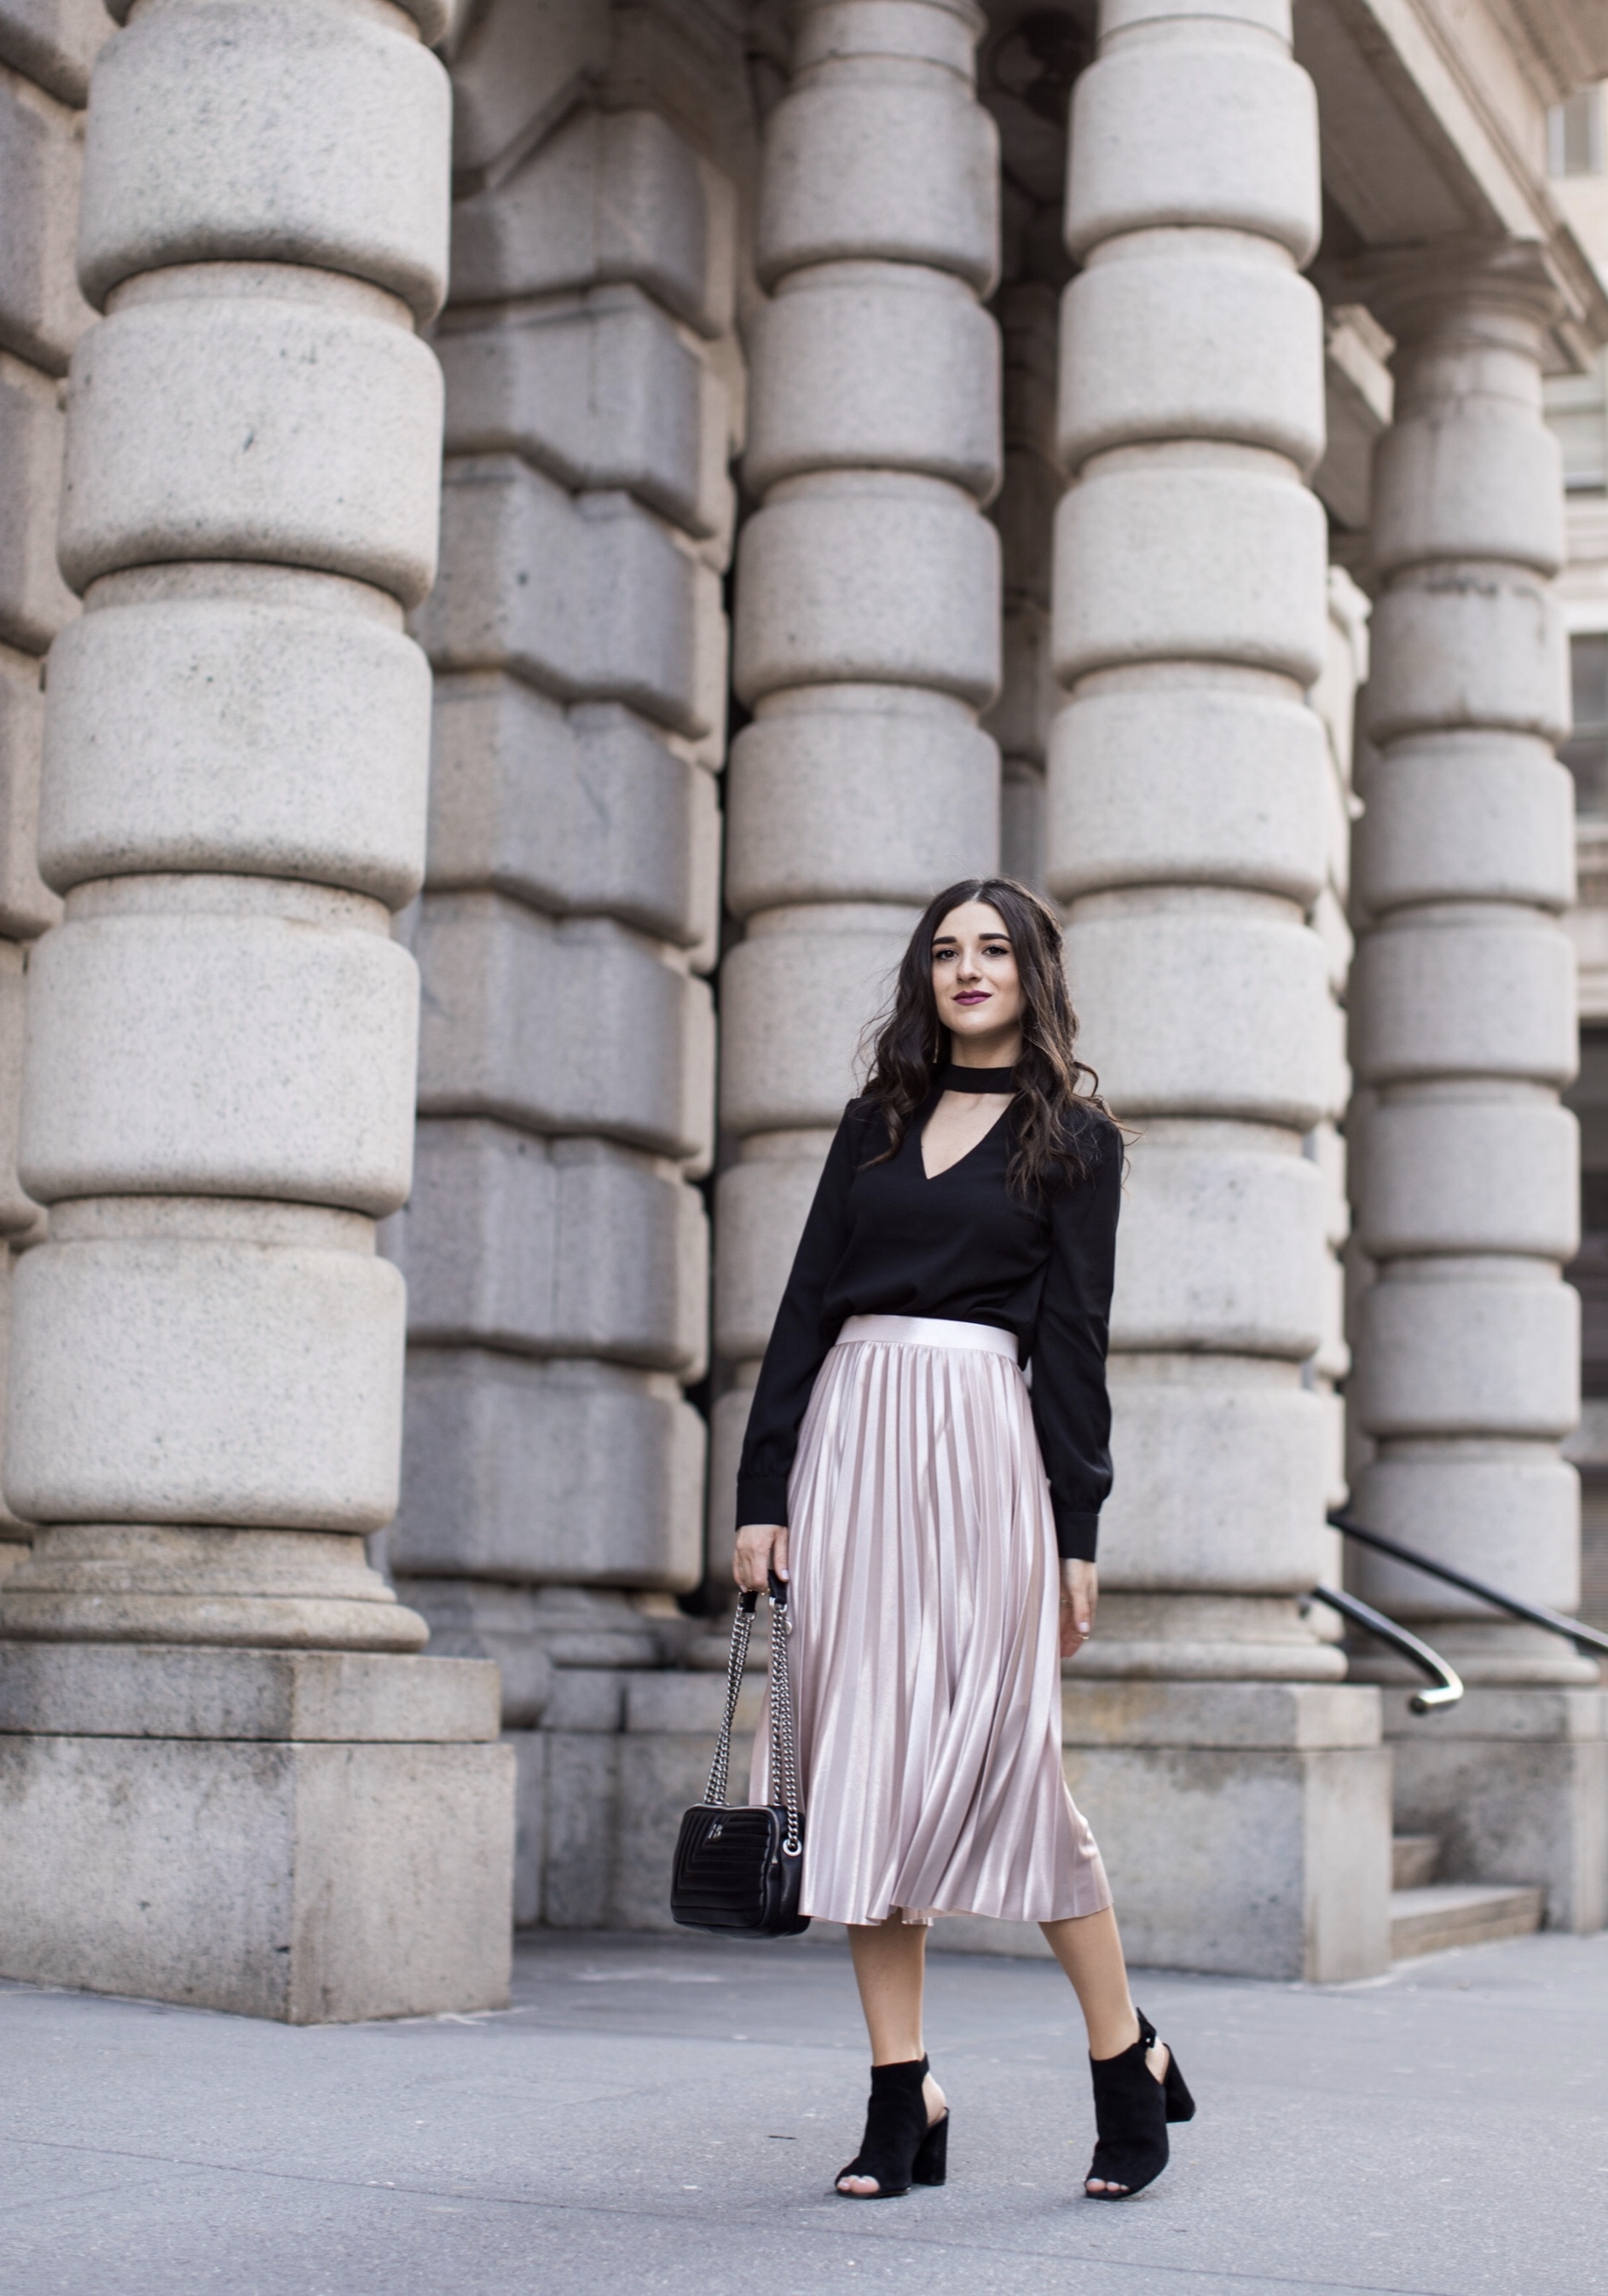 Metallic Midi Skirt Black Cutout Top How I Pack In A Carry On Esther Santer Fashion Blog NYC Street Style Blogger Outfit OOTD Trendy Feminine Girly Spring Hairstyle Waves Travel Tips Honeymoon Photshoot  Pose Wearing Shop Peep Toe Booties Henri Bendel.jpg